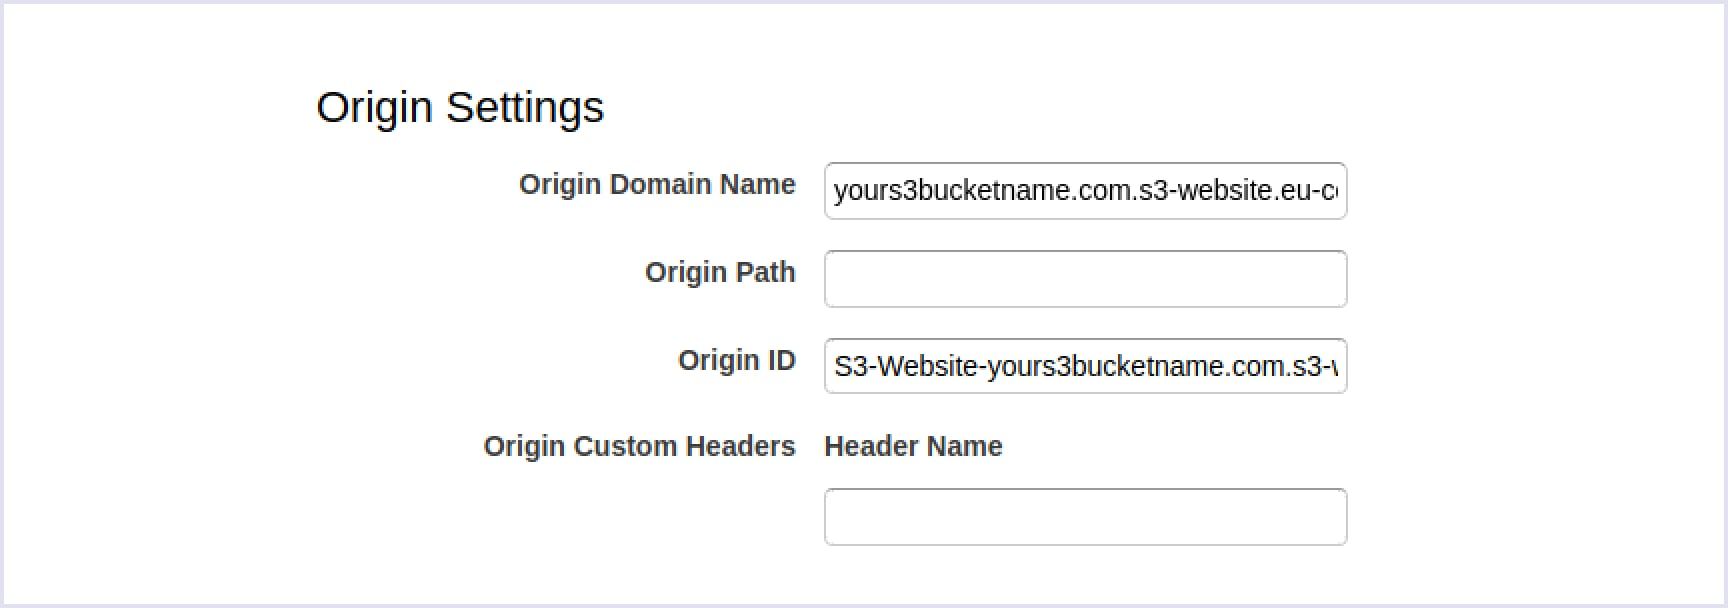 Setting up an origin domain name on CloudFront